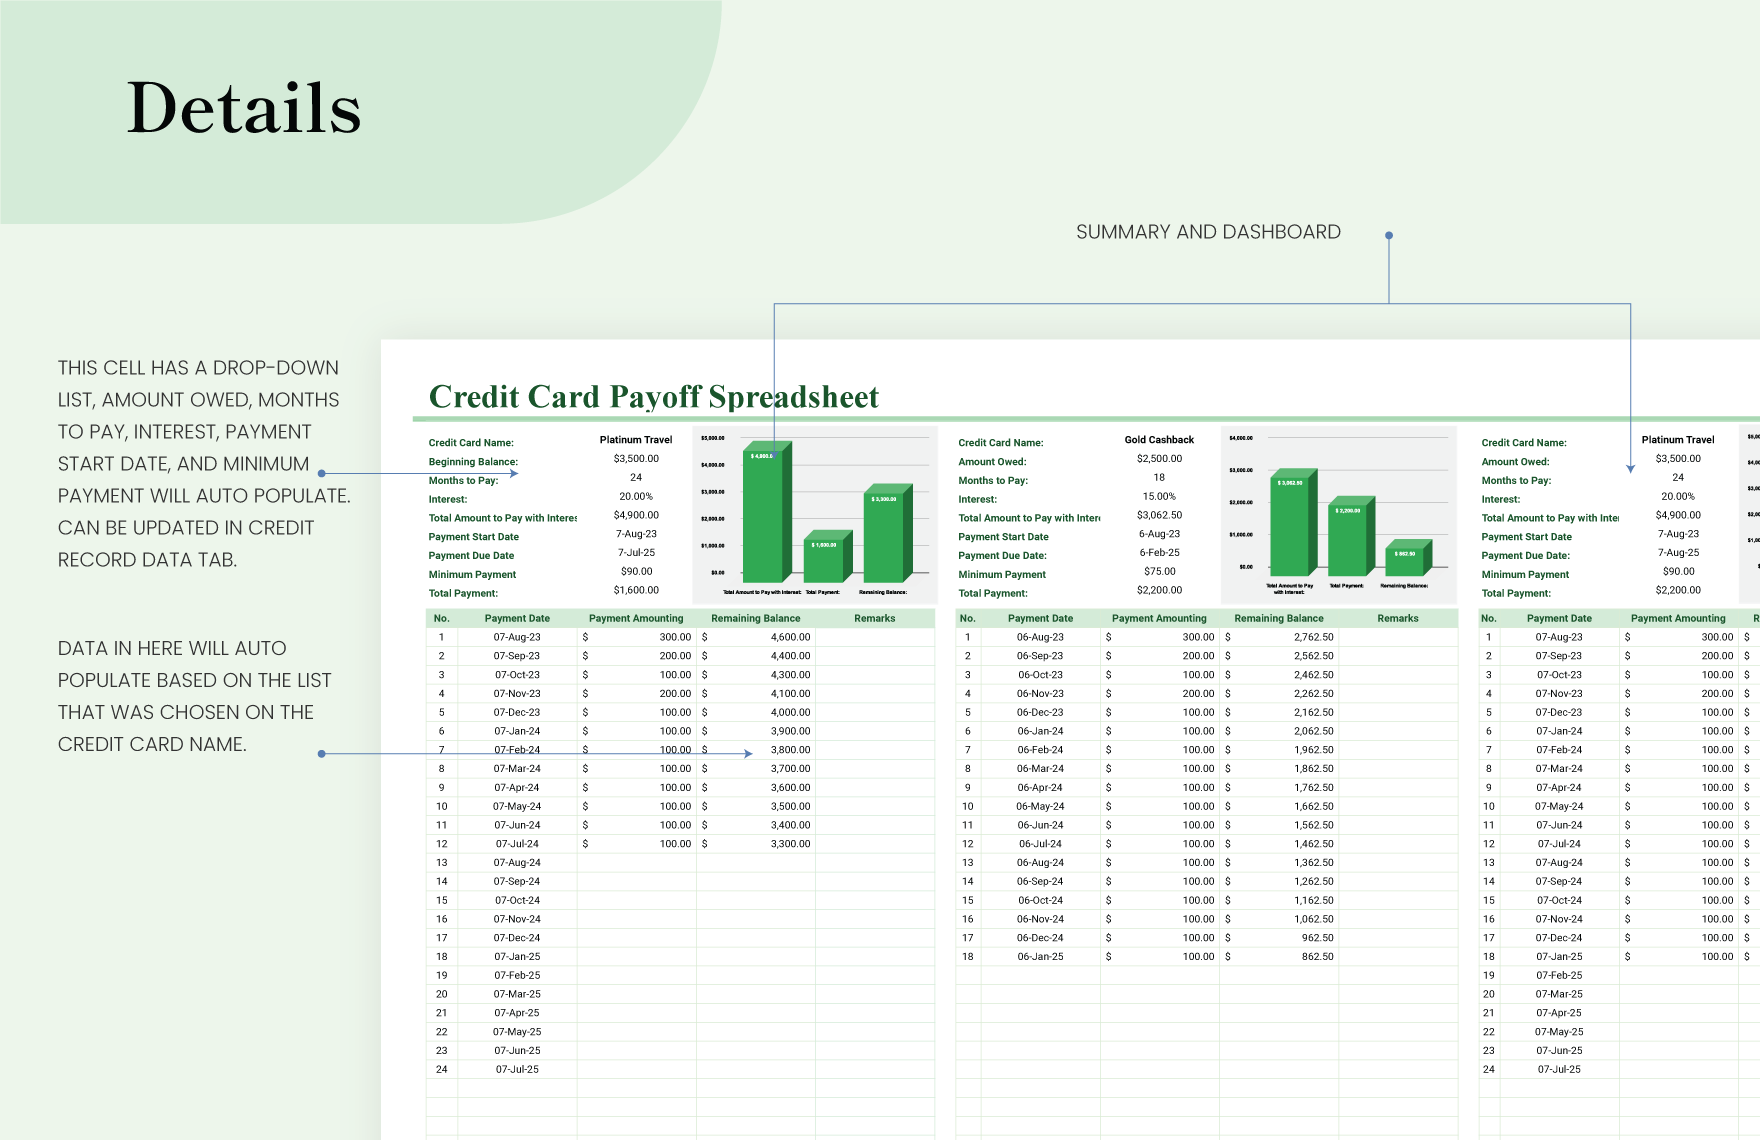 Credit Card Payoff Spreadsheet Template